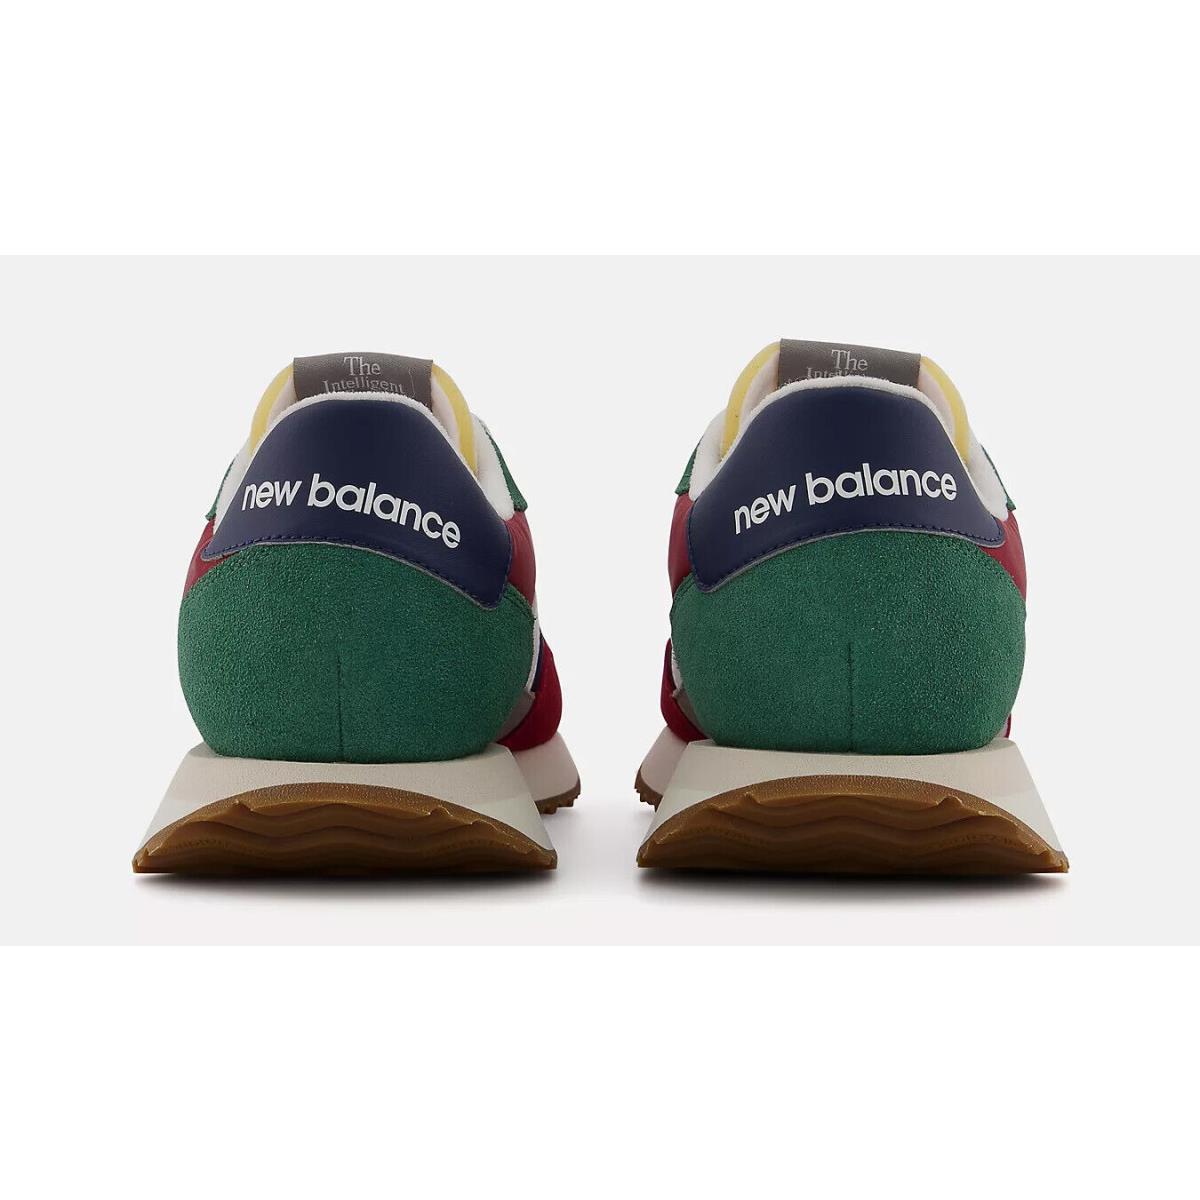 New Balance shoes  - Red/Green/Navy Blue 14